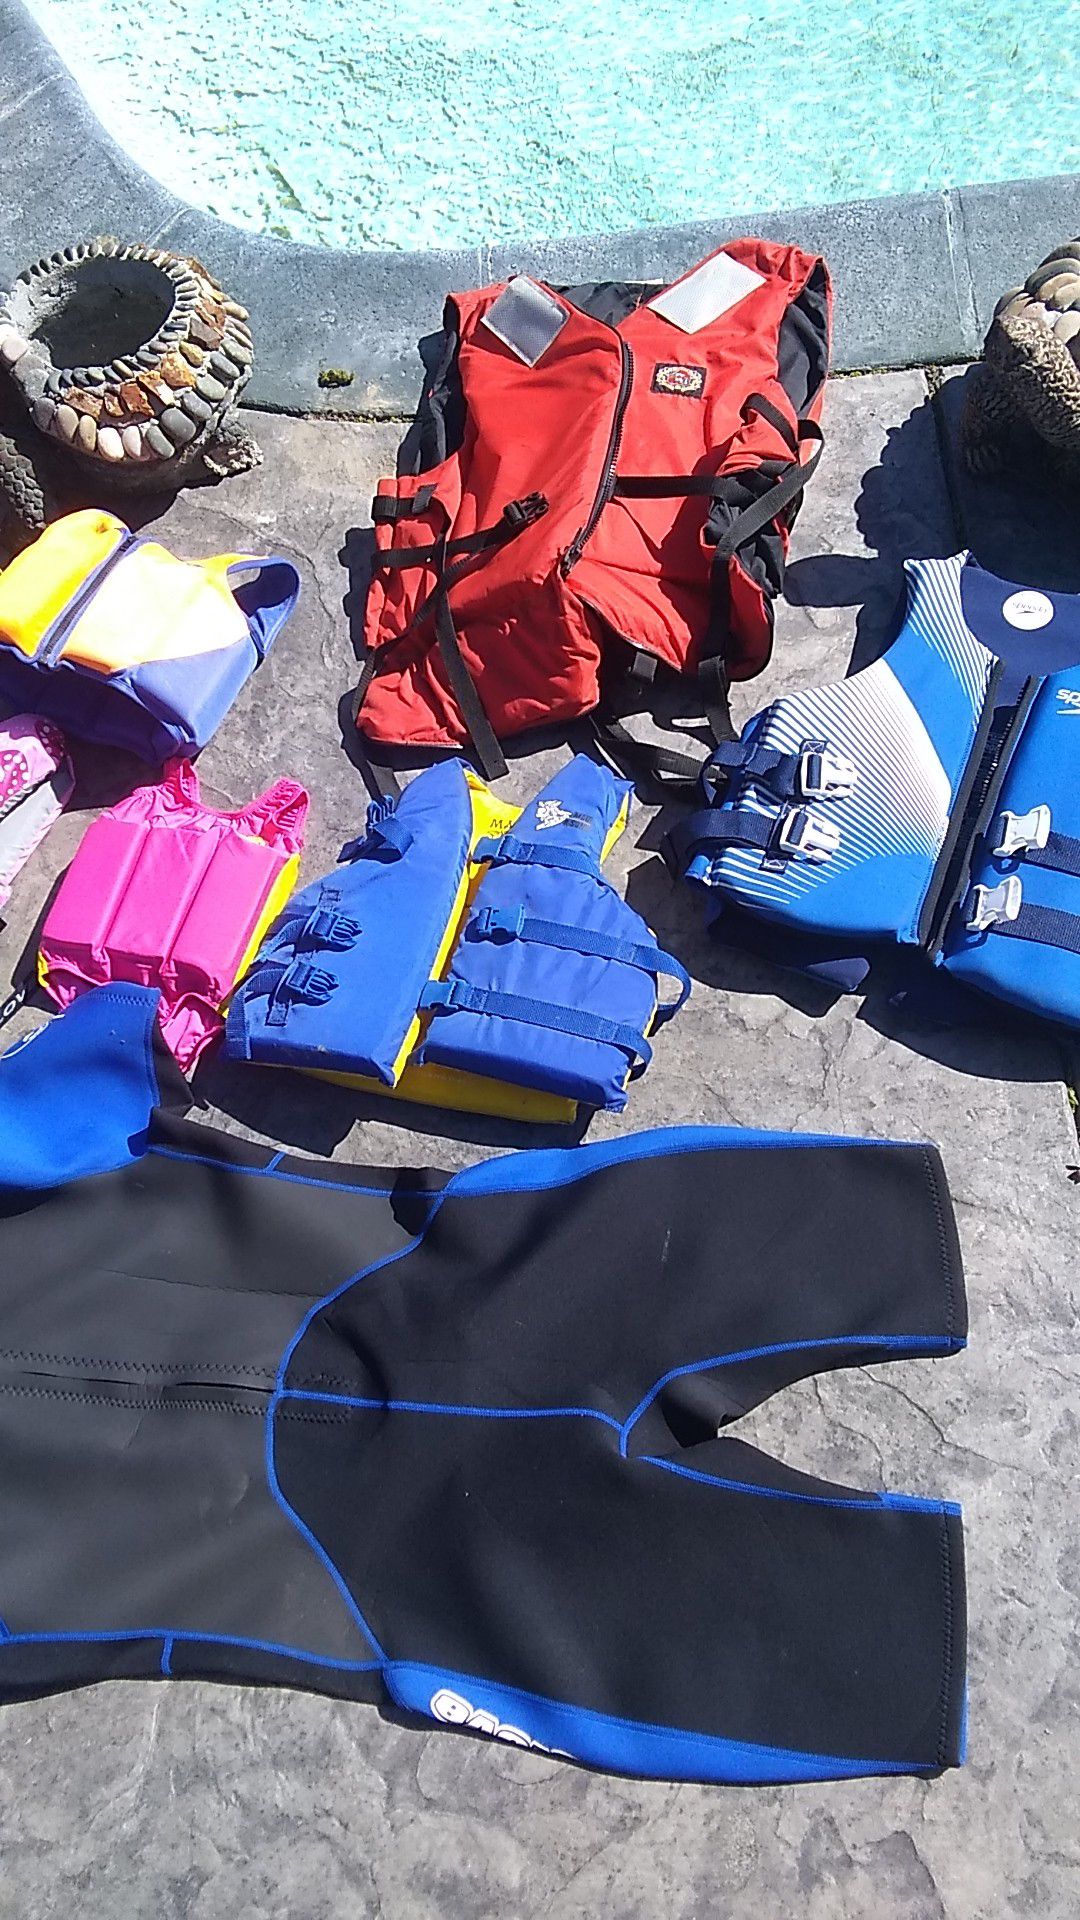 Lot of Different sizes of life jackets kids are all